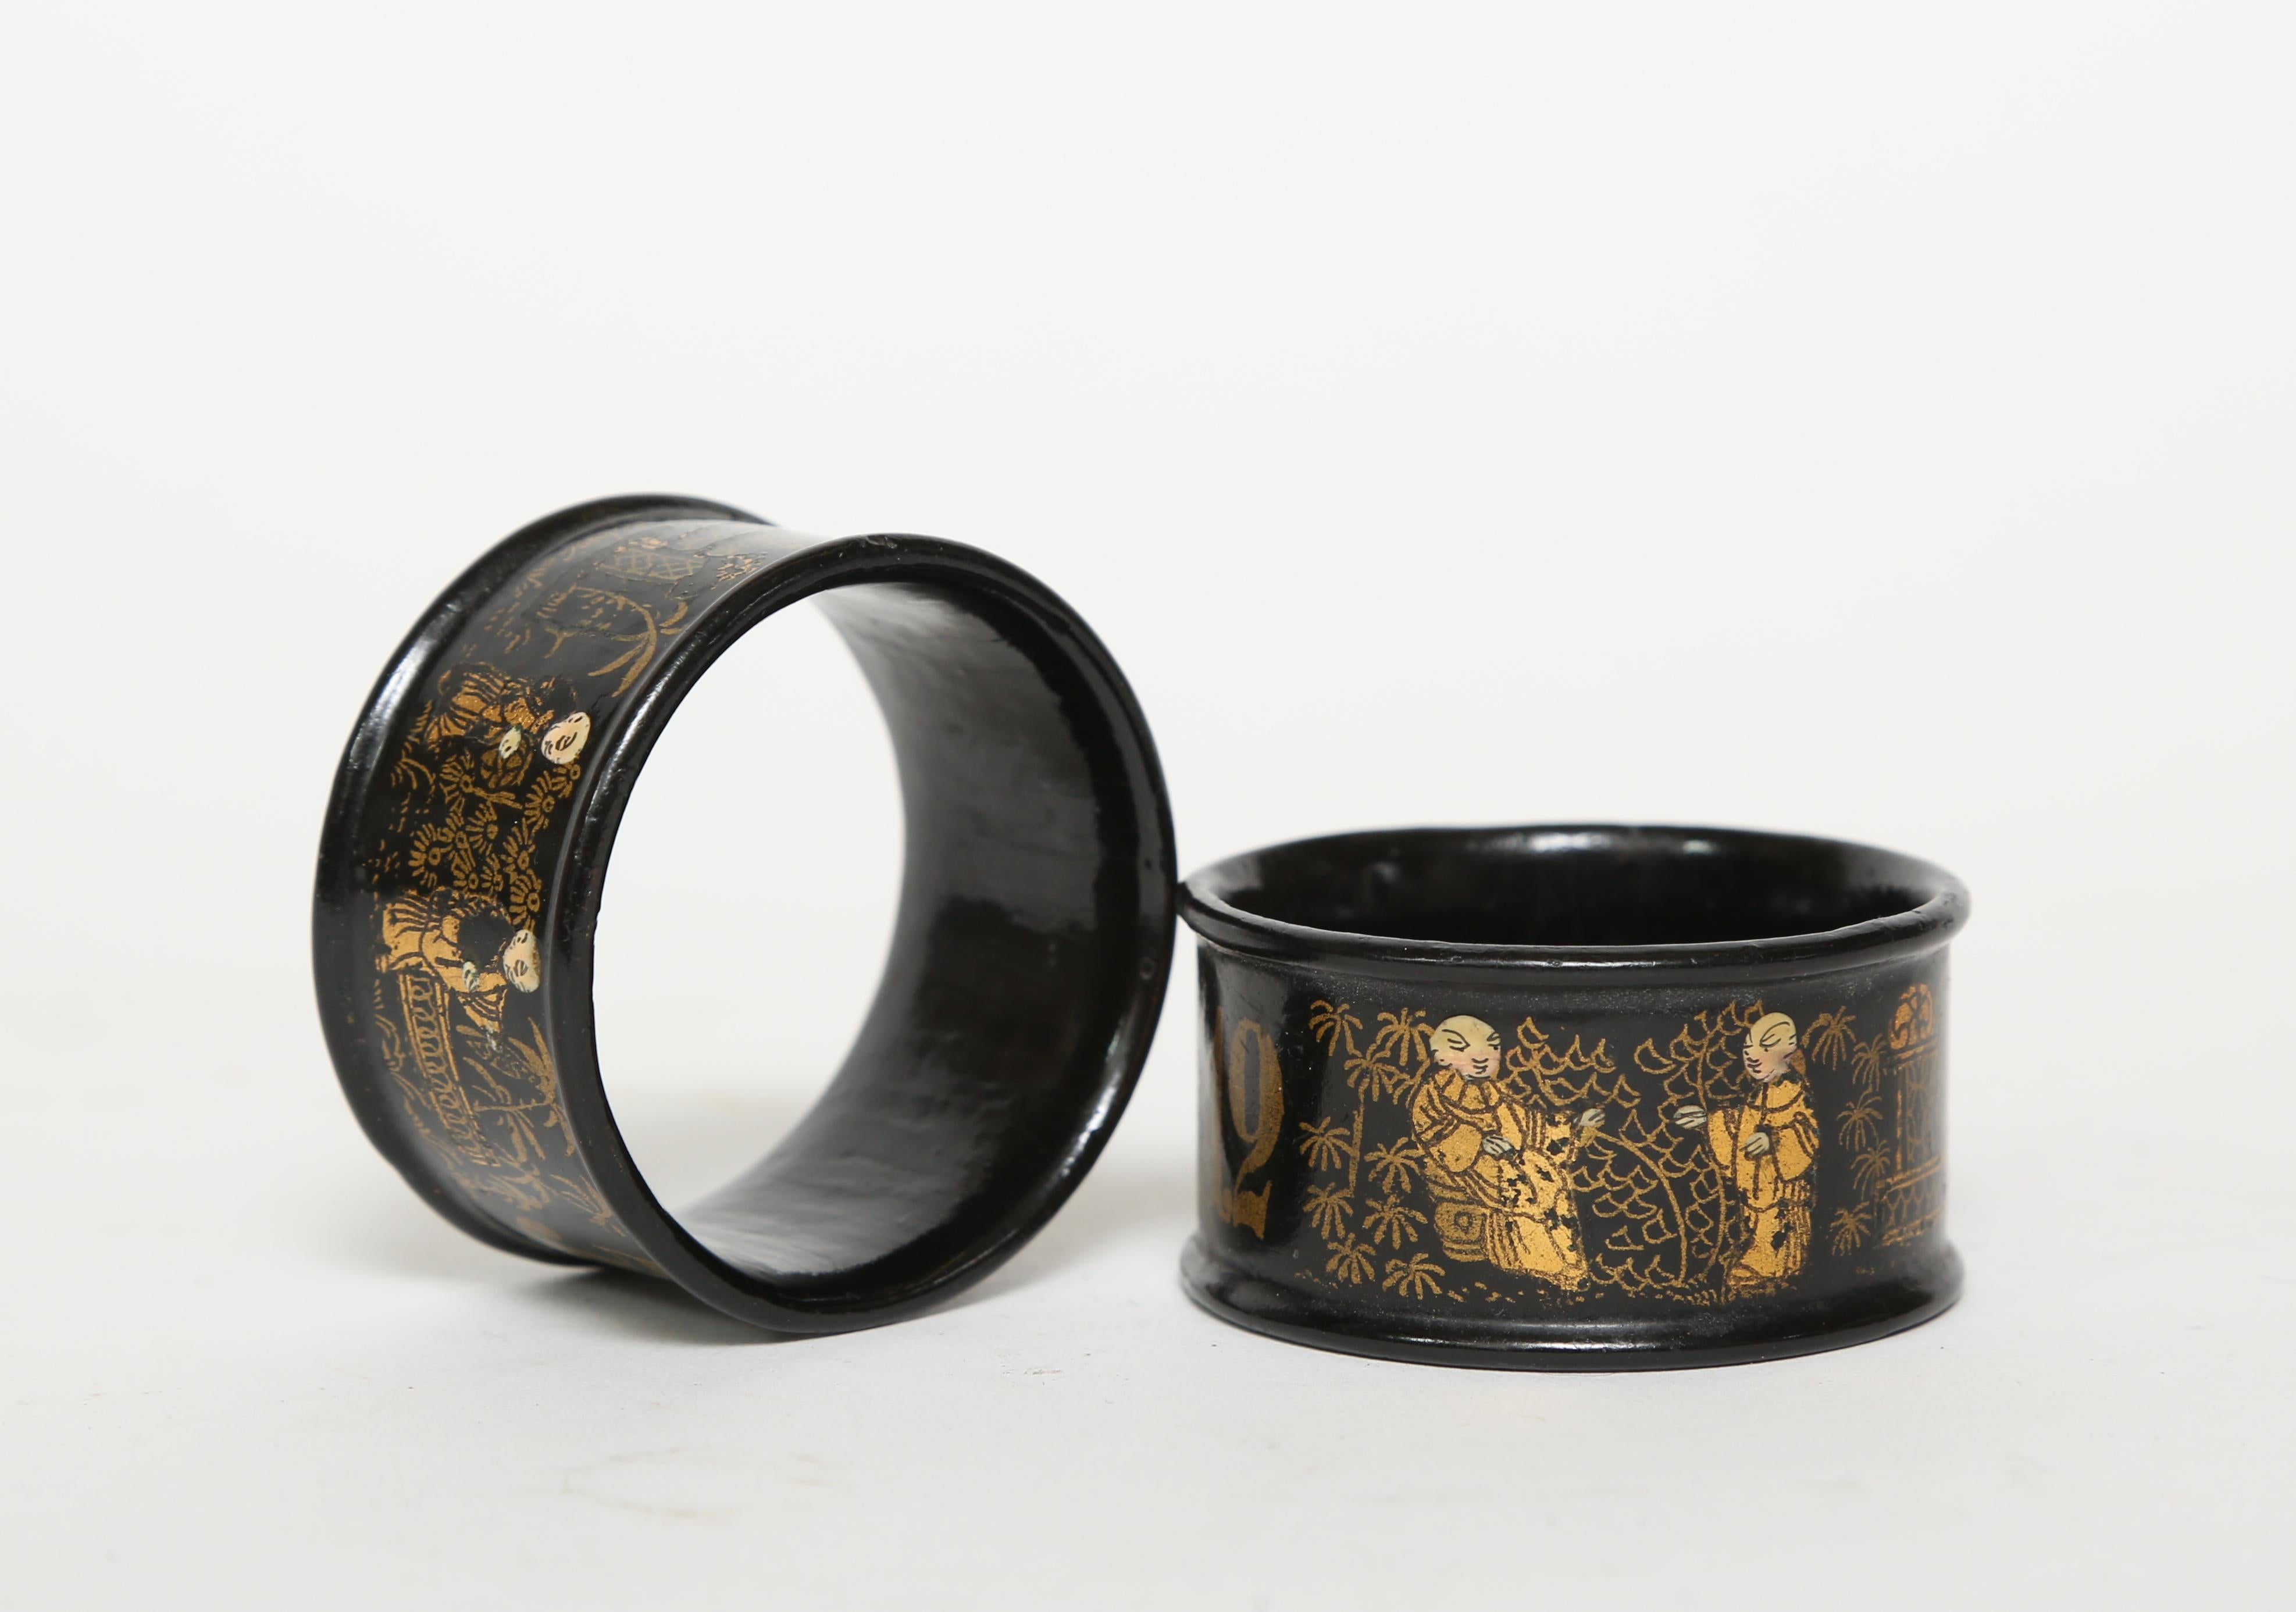 English  Antique  Black Lacquer on Papier Mâché Napkin Rings with a Chinoiserie Motif